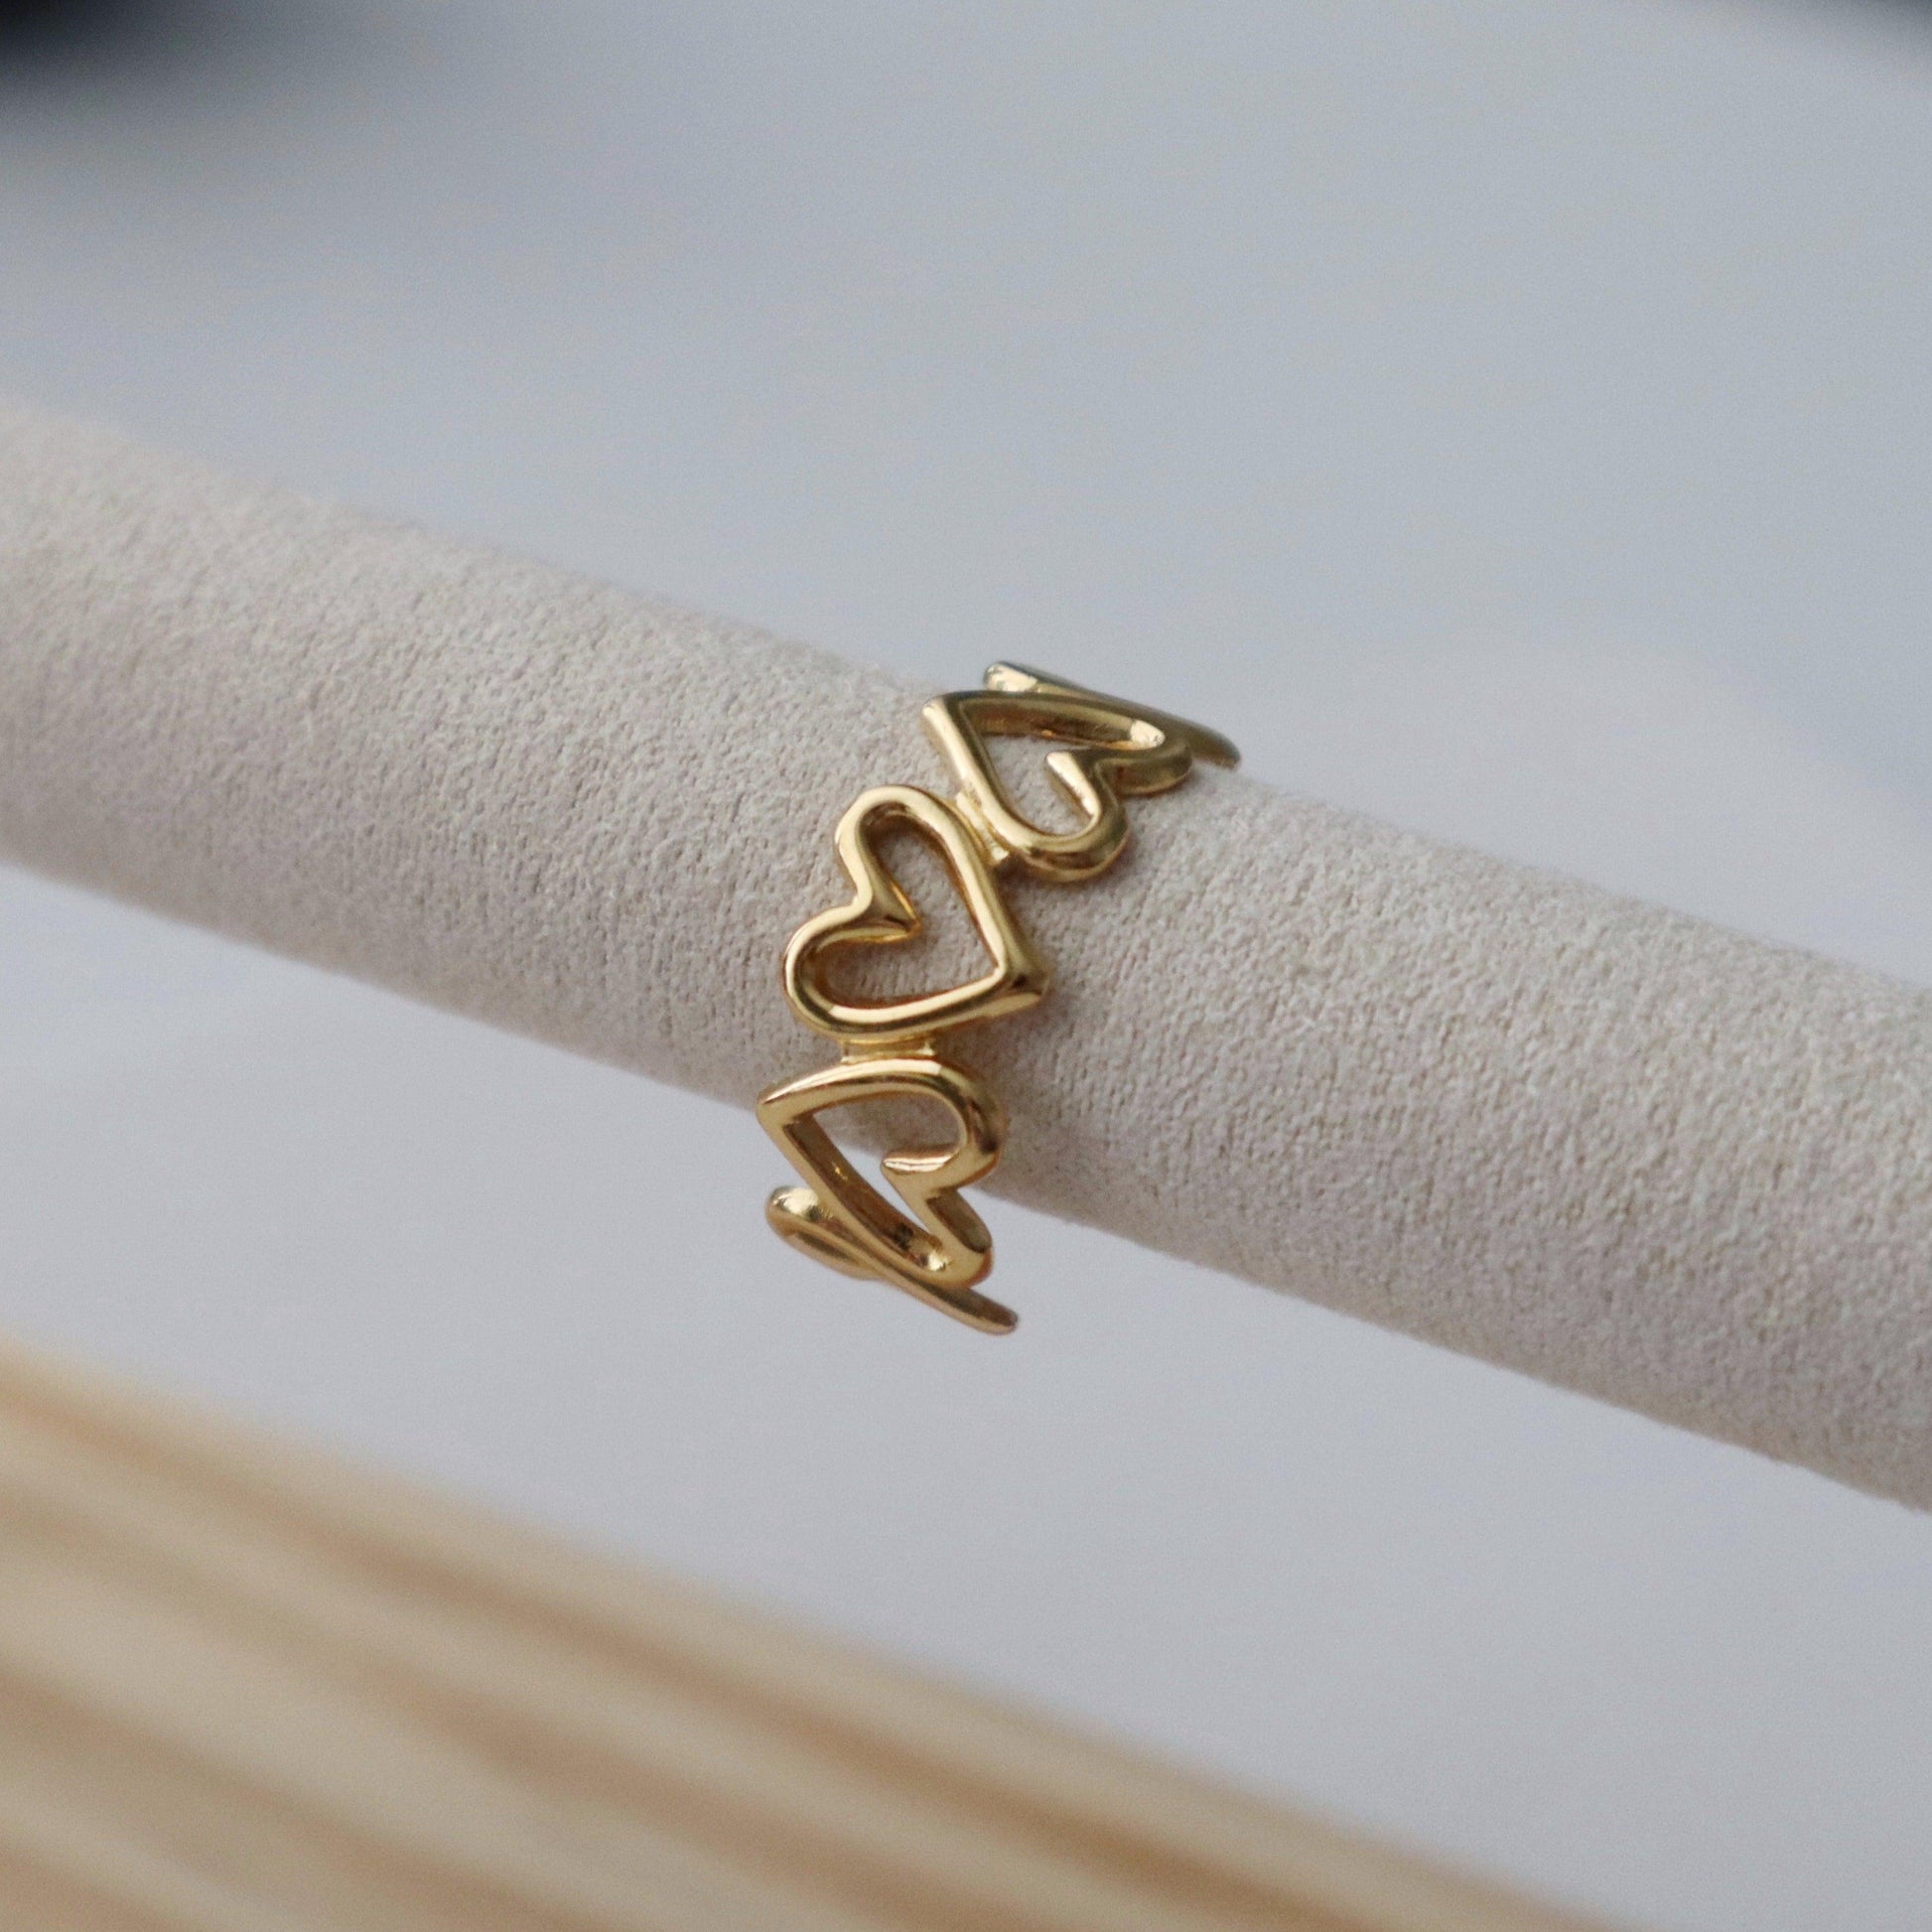 Heart Ring | Adjustable Ring - JESSA JEWELRY | GOLD JEWELRY; dainty, affordable gold everyday jewelry. Tarnish free, water-resistant, hypoallergenic. Jewelry for everyday wear